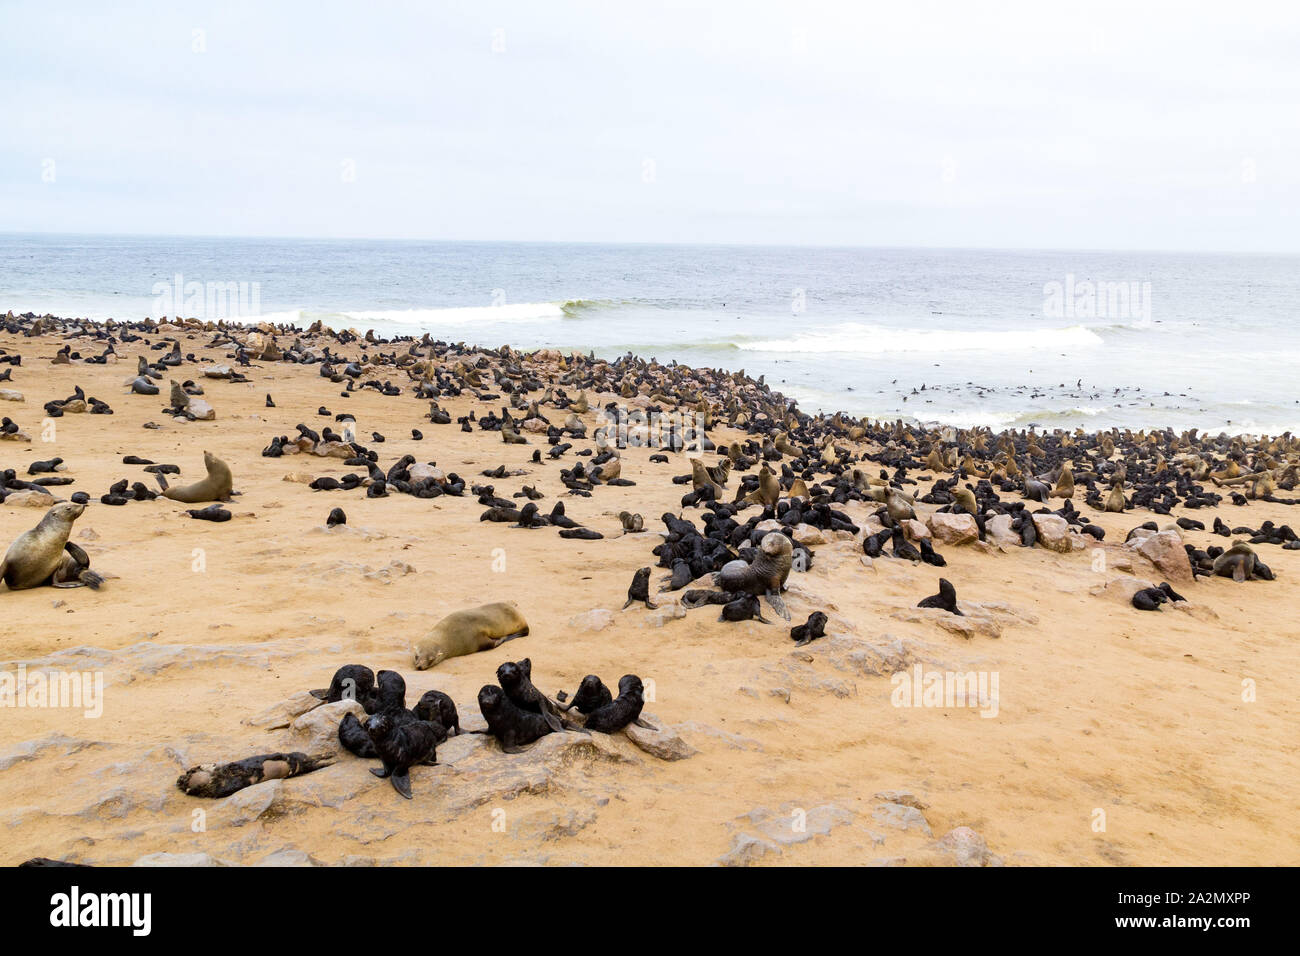 South African Fur Seal colony at Cape Cross Seal Reserve, Namibia, Africa Stock Photo